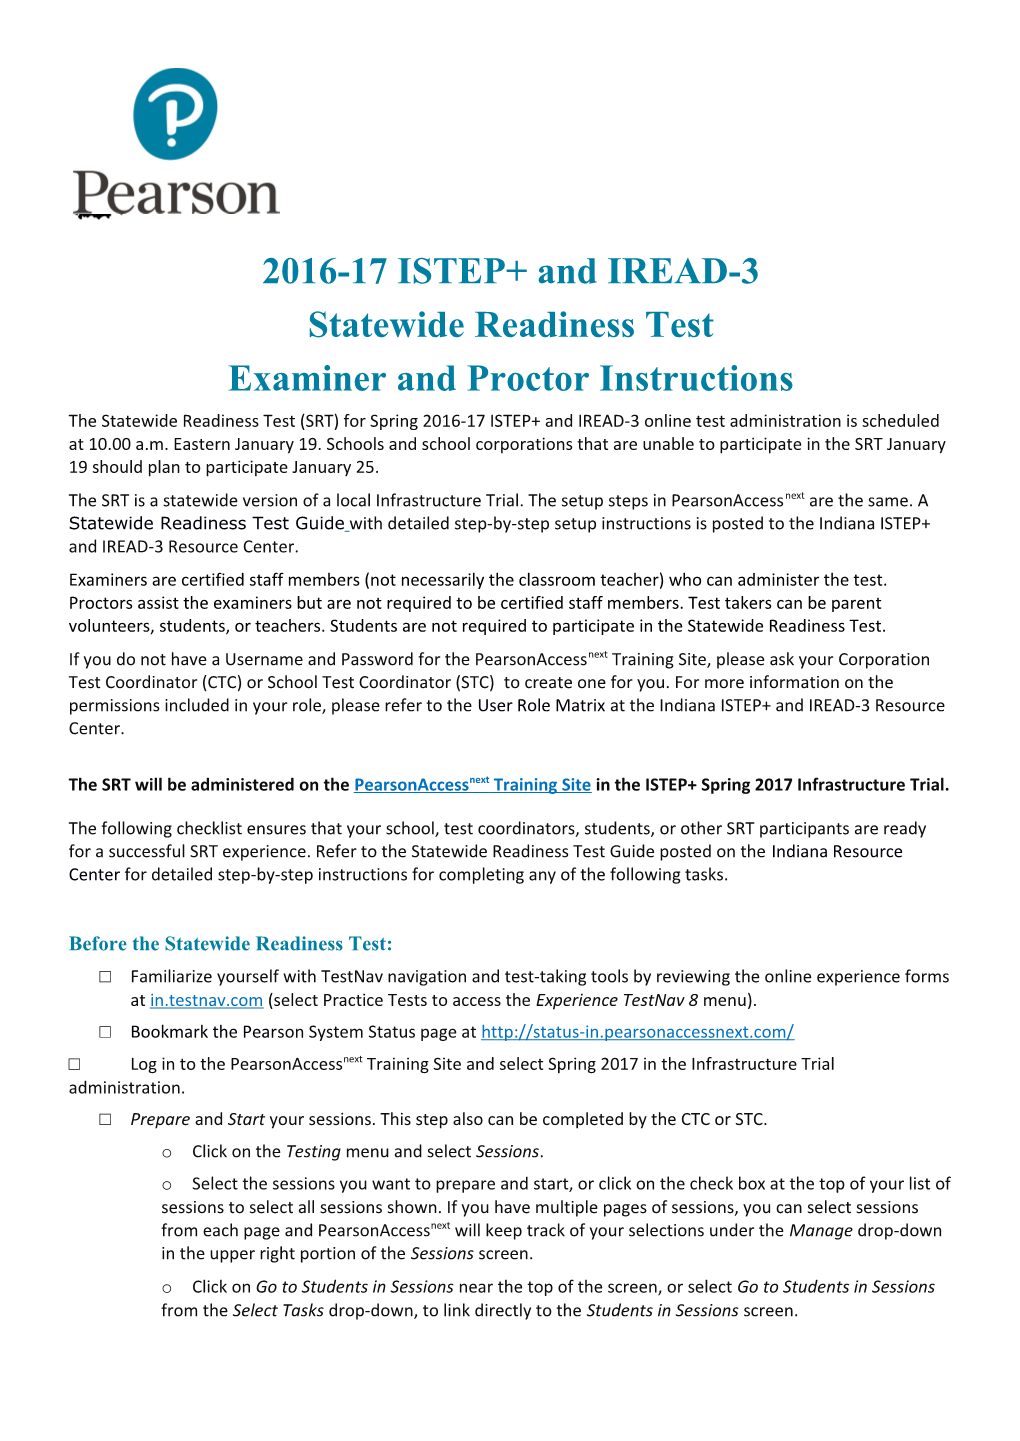 Examiner and Proctor Instructions